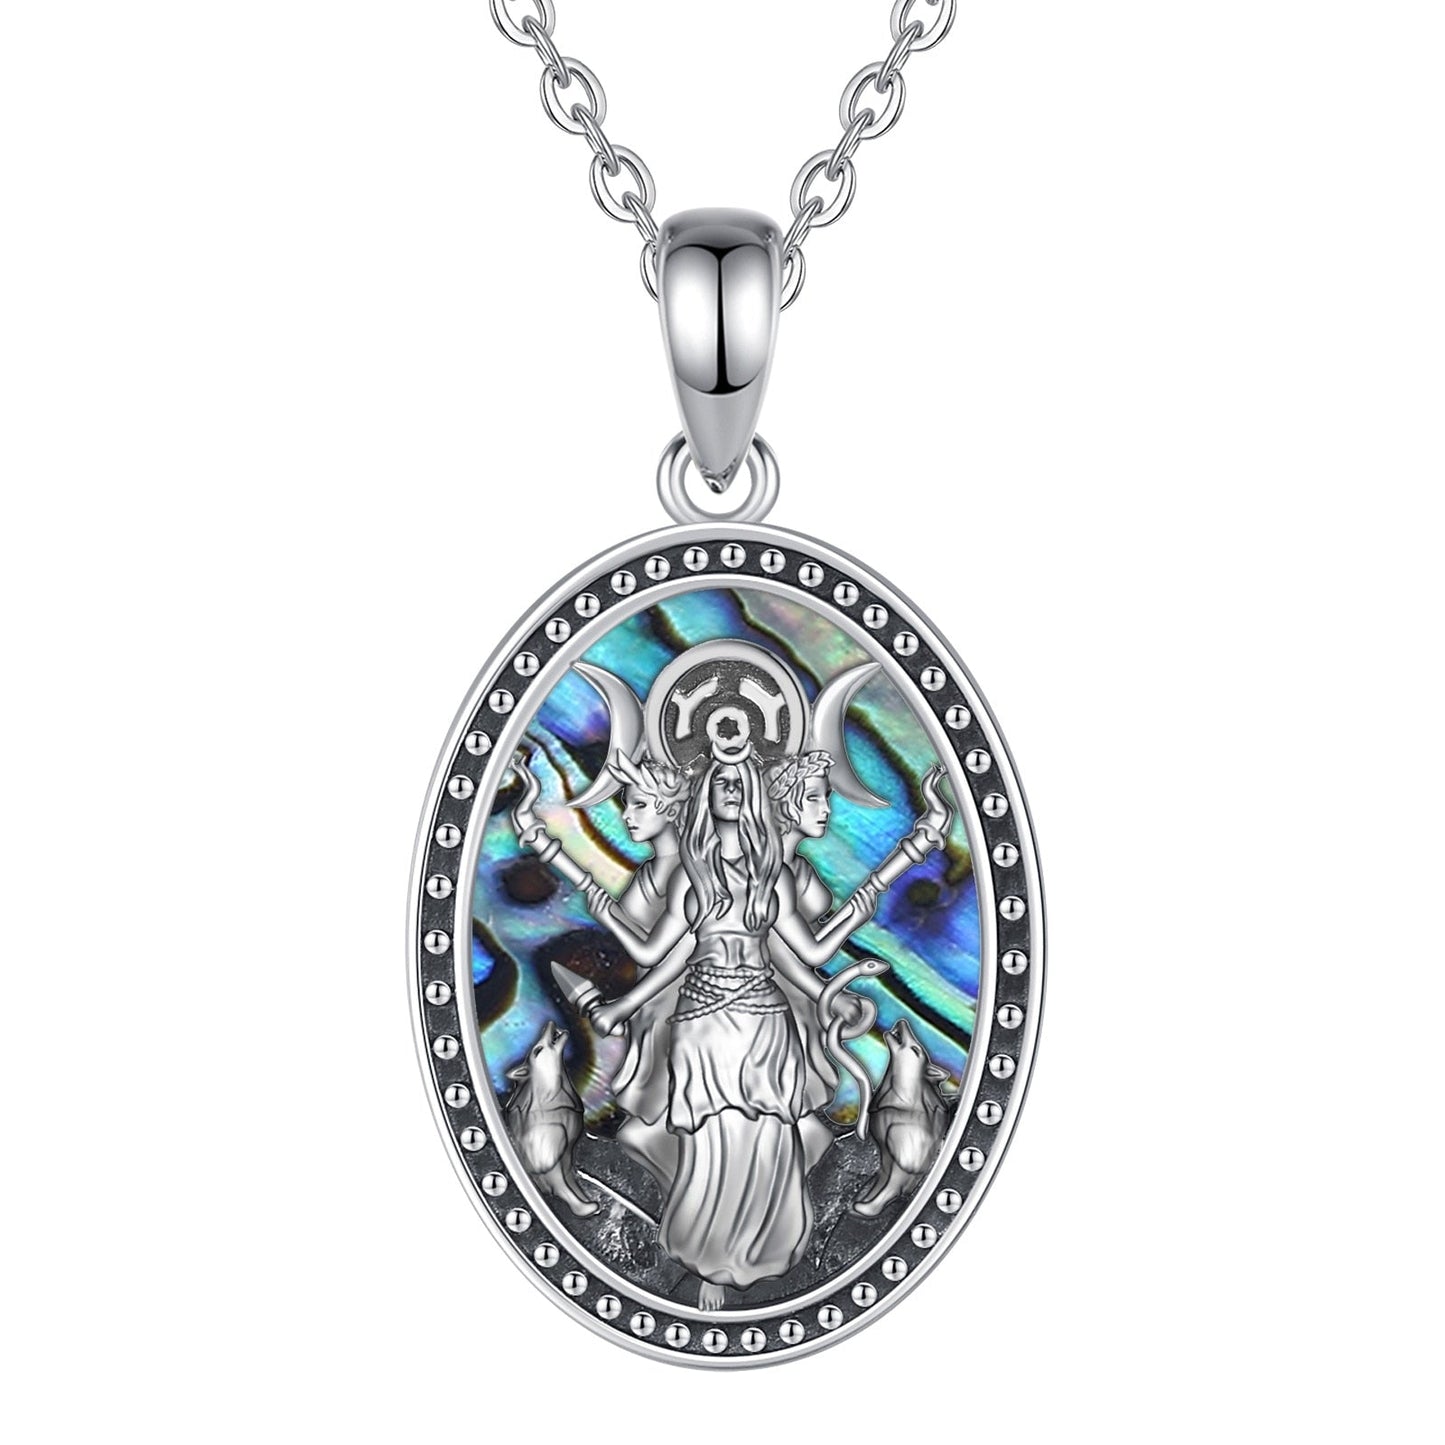 acelimosf™-Natural Abalone Triple Moon Goddess Necklace Hecate Amulet Jewelry